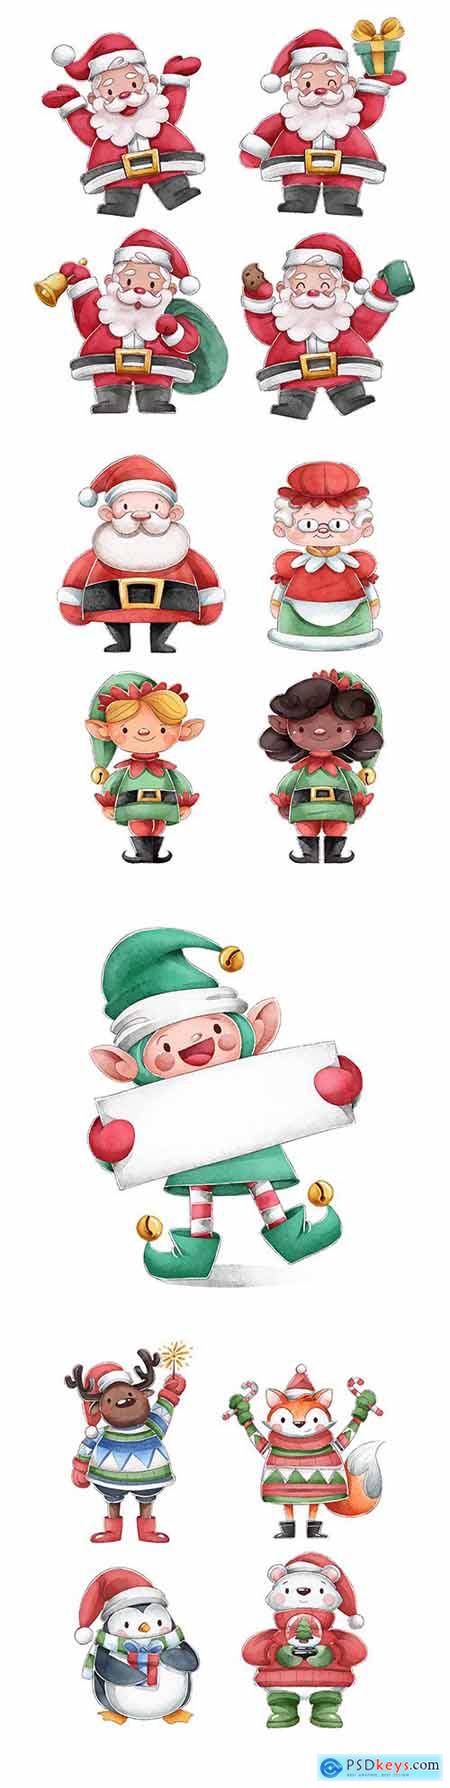 Funny Santa Claus and his friends watercolor illustrations